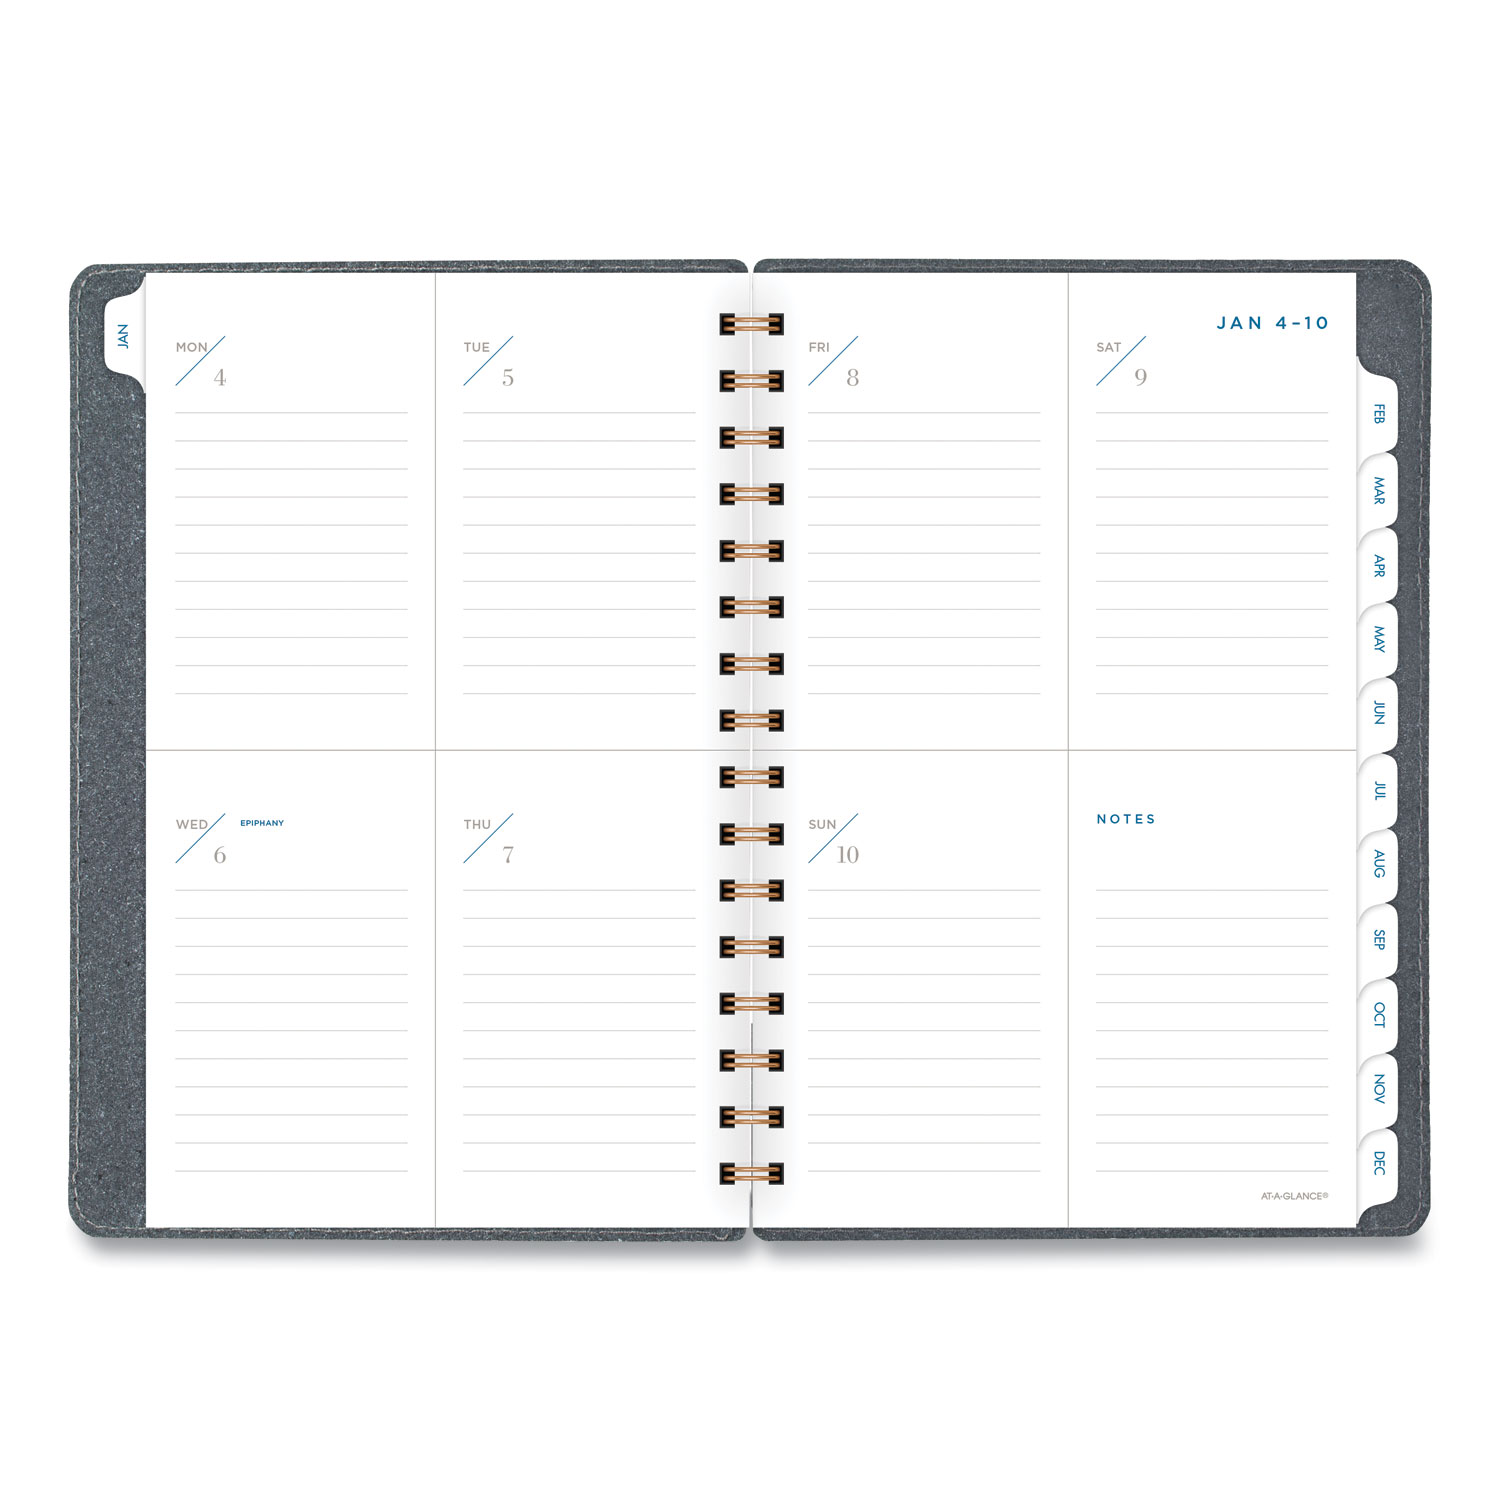  AT-A-GLANCE YP20045 Signature Collection Heather Gray Planner, 8 1/2 x 5 3/4, 2020-2021 (AAGYP20045) 